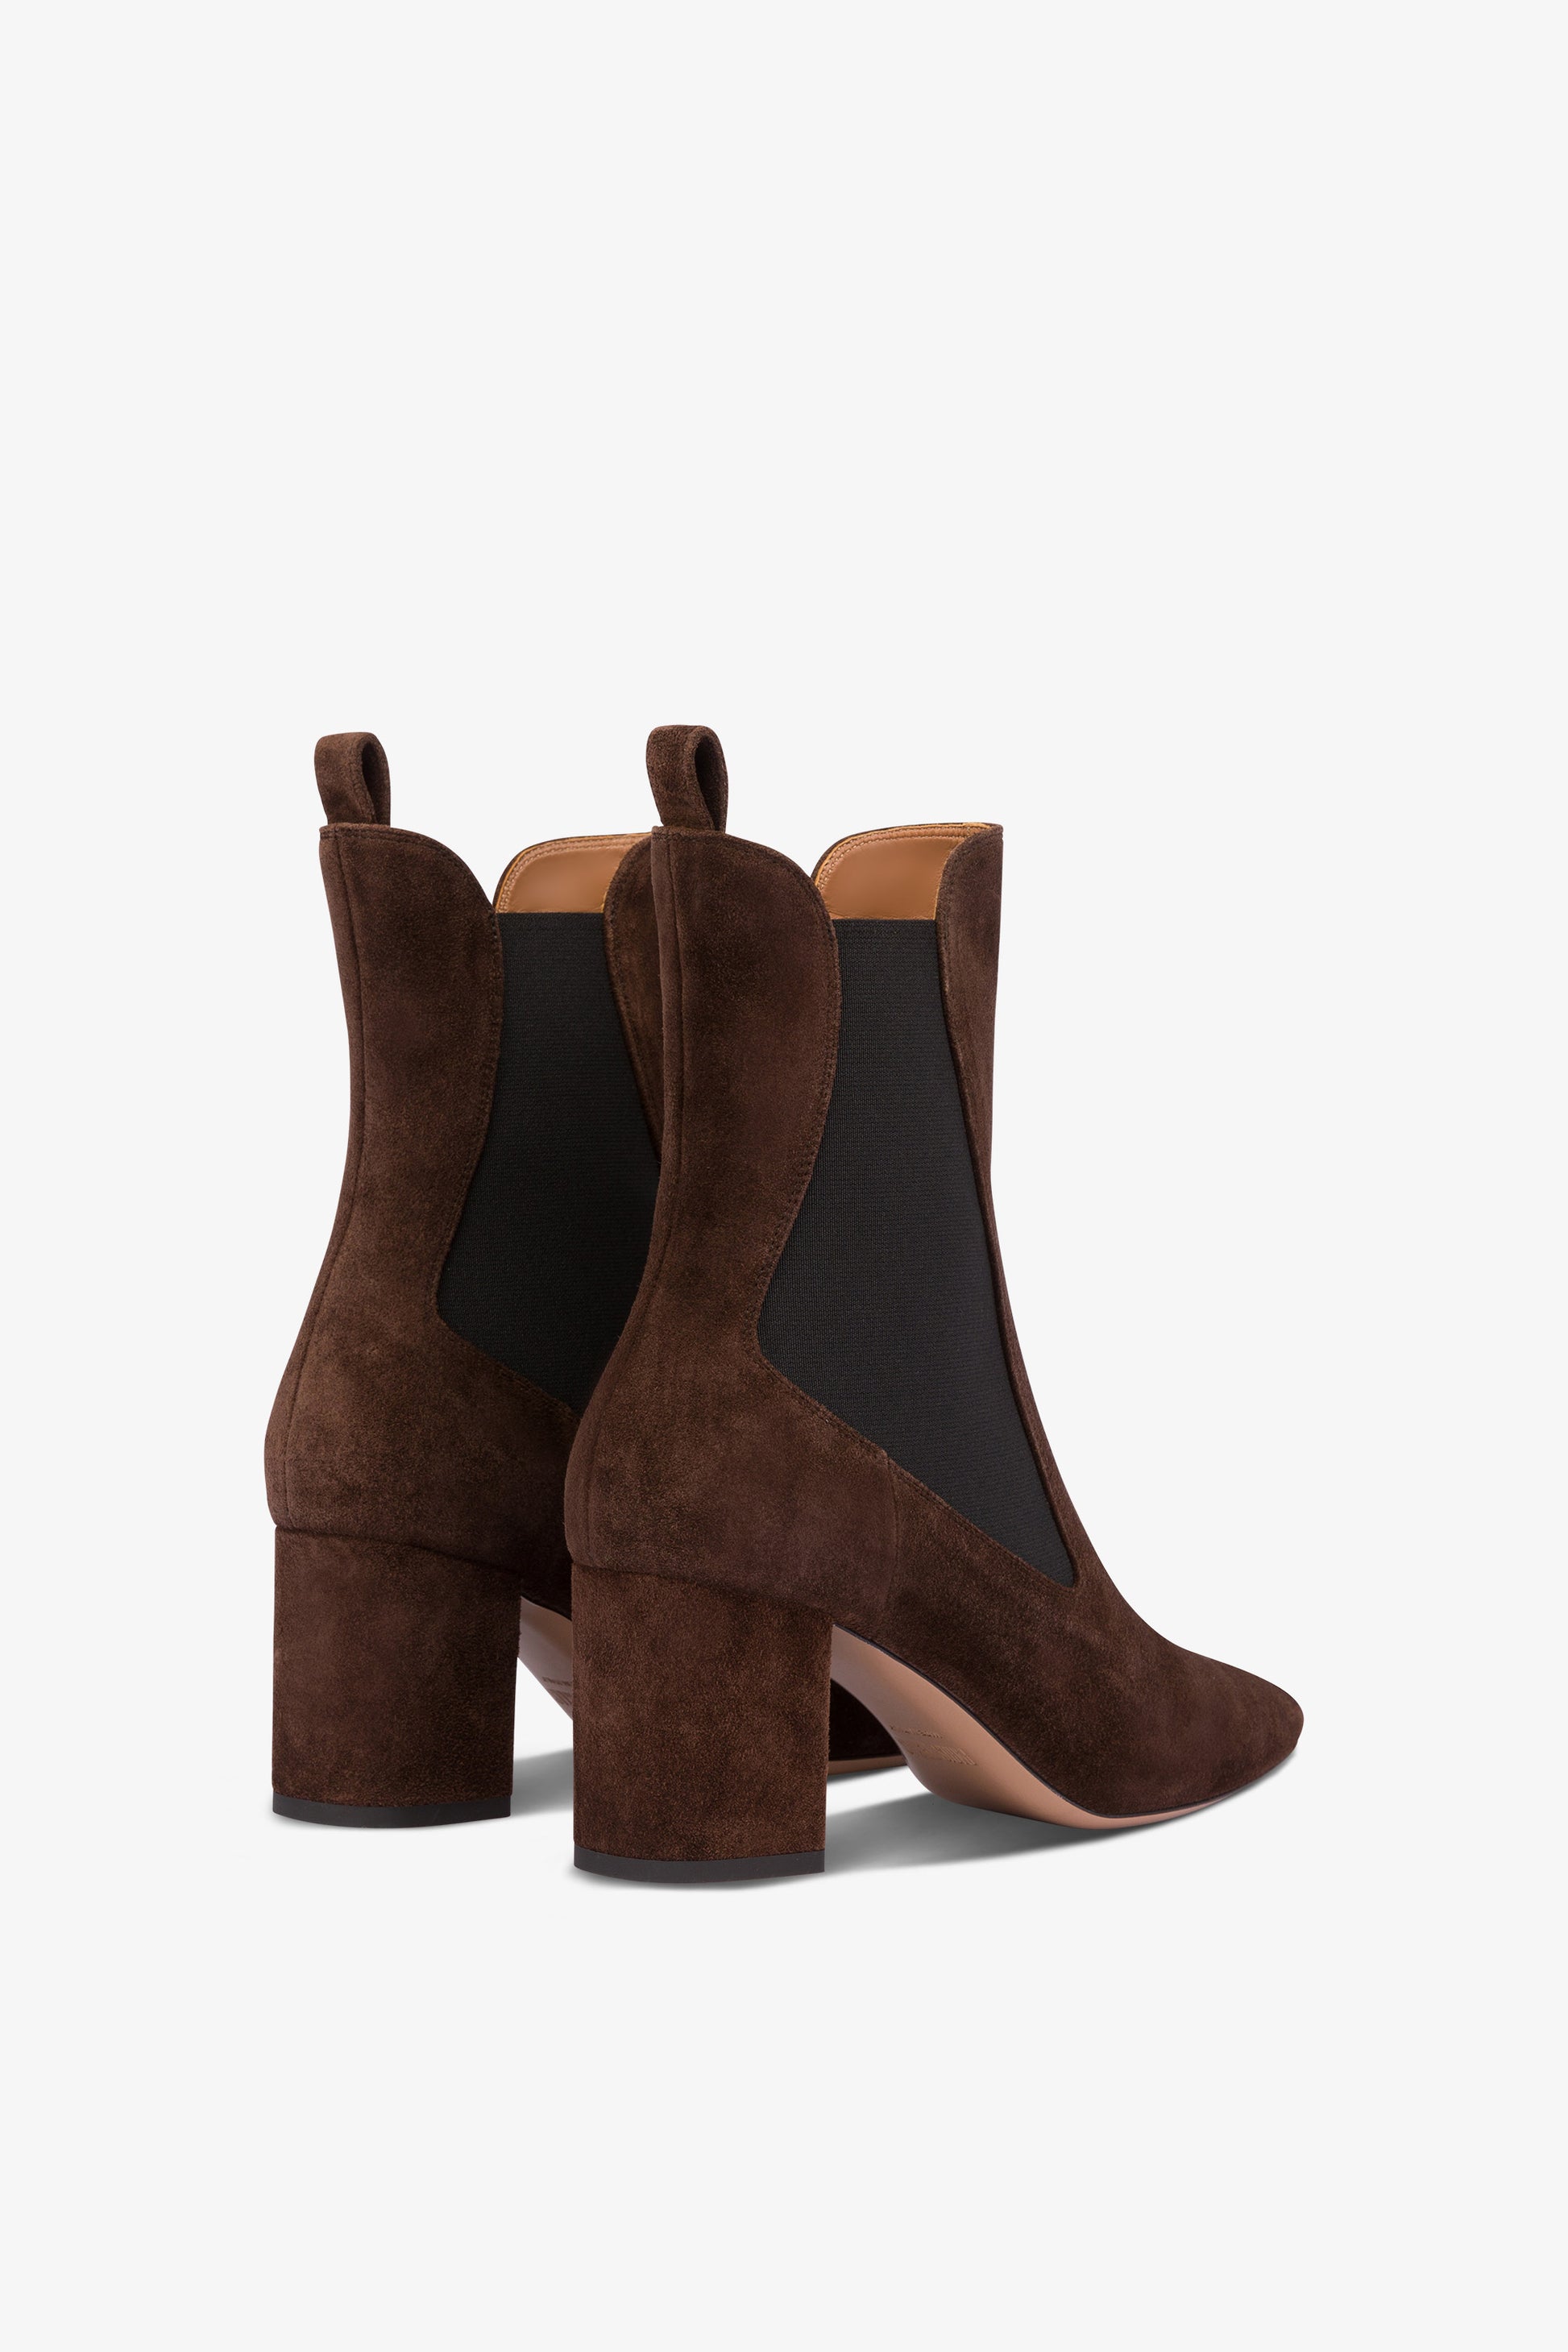 Pointed ankle boots in soft pepper suede leather